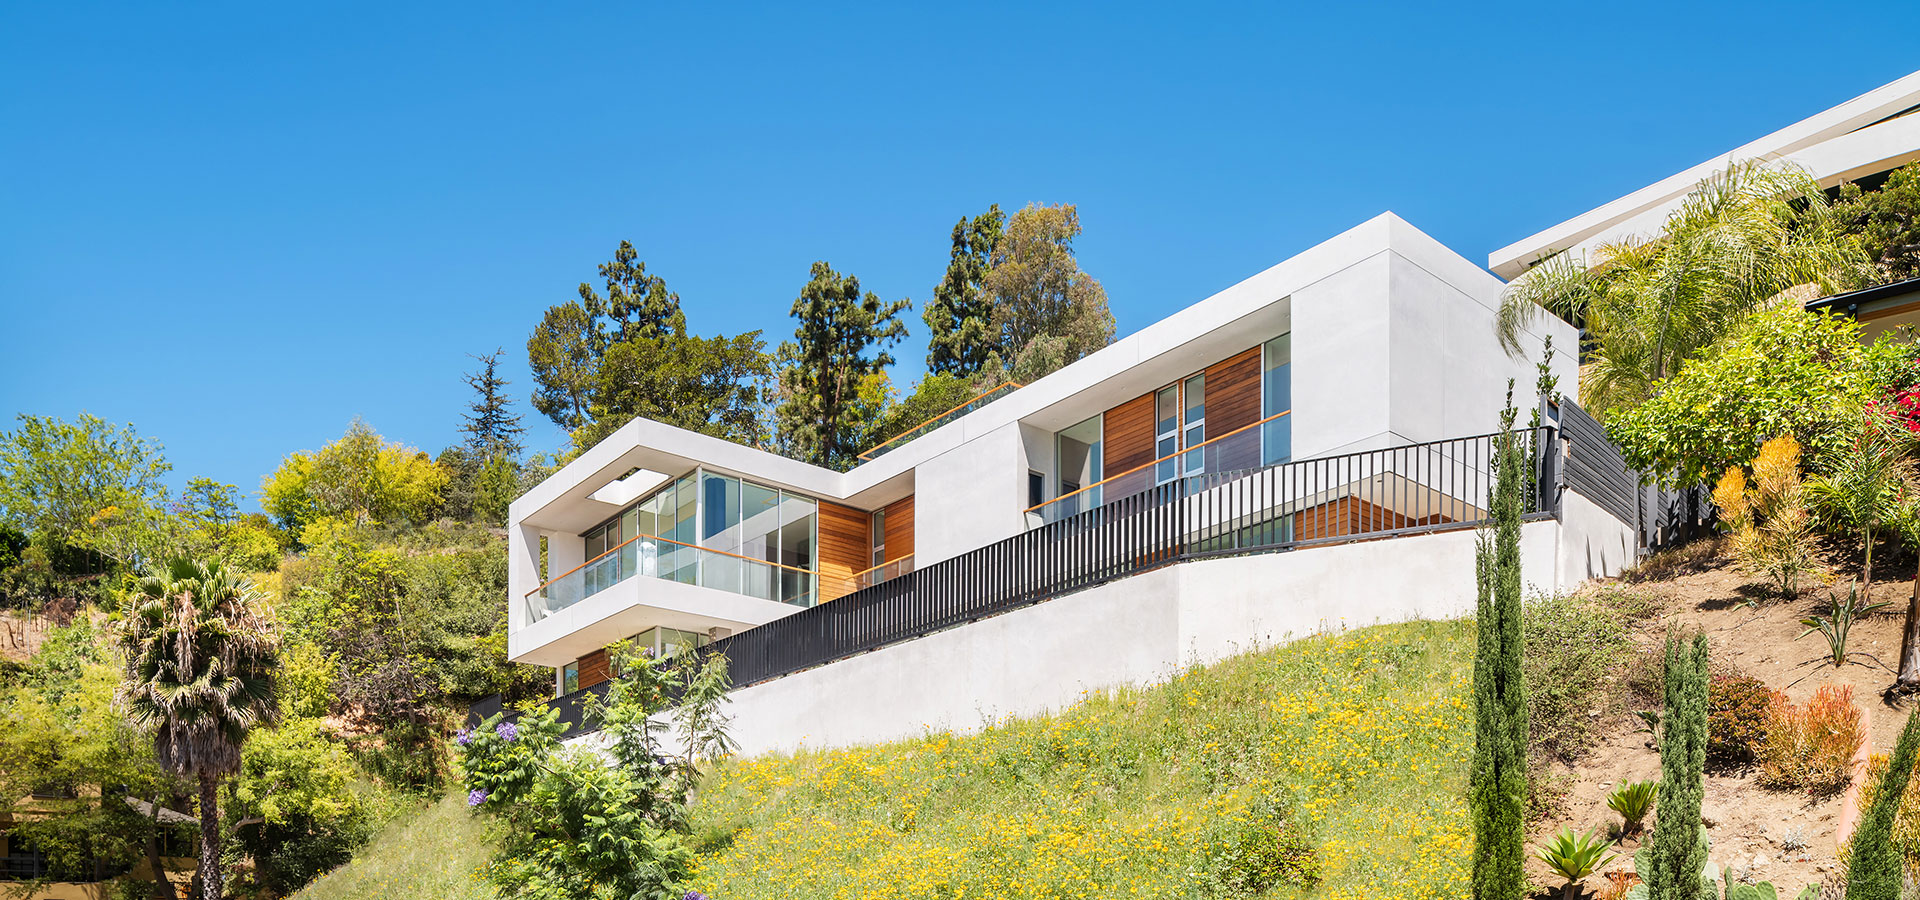 The Devlin Residence sits on a hill covered in California native wildflowers. Photo: © Paul Vu, Here and Now Agency